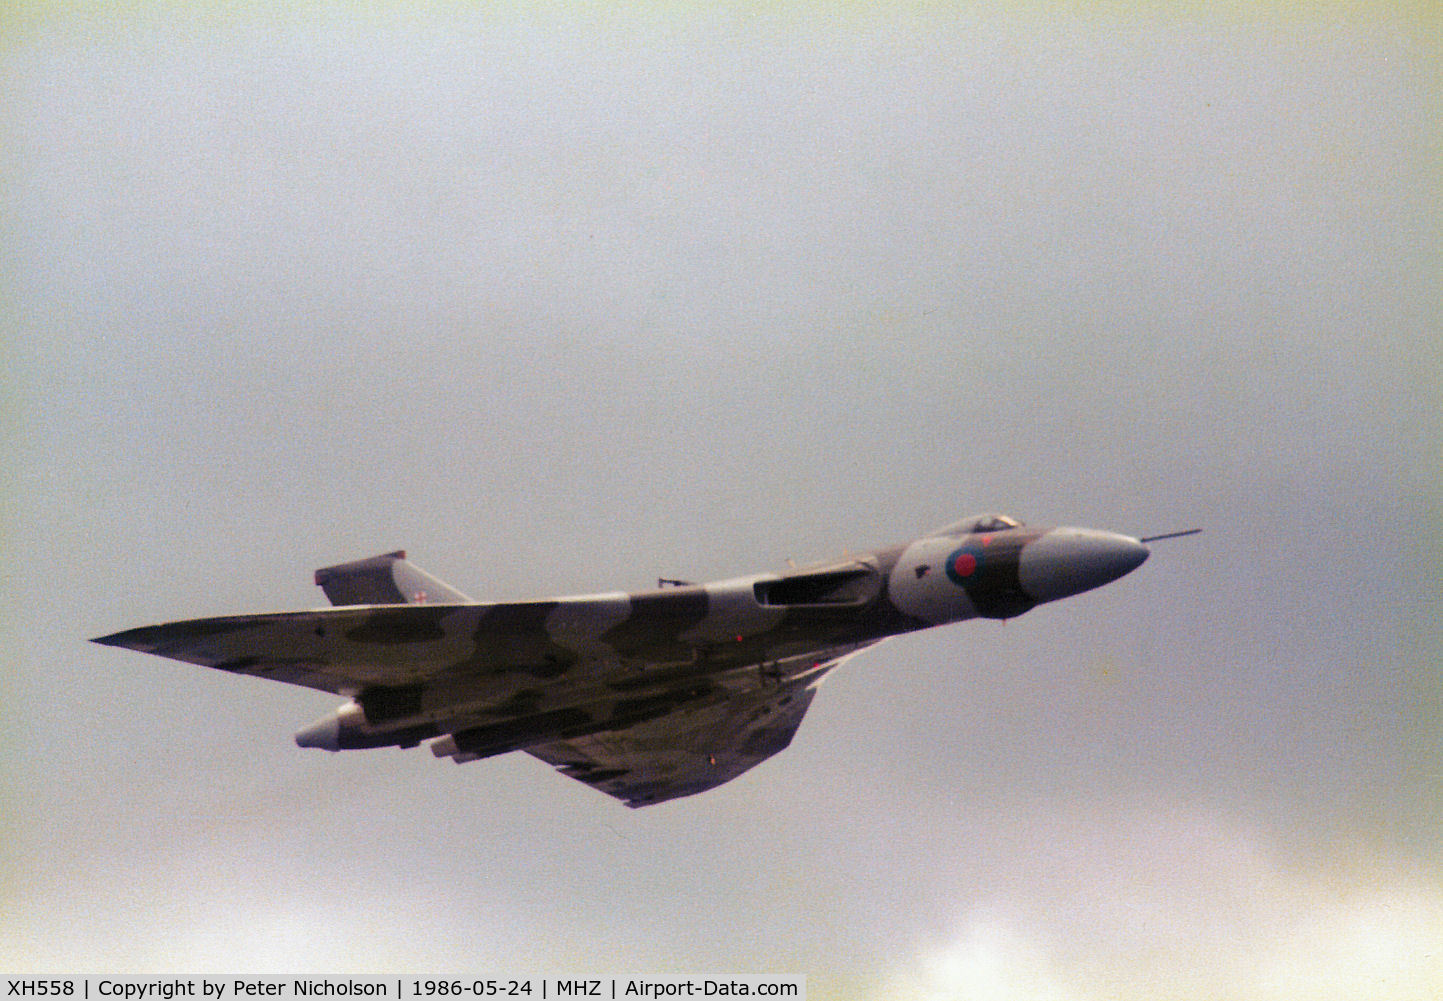 XH558, 1960 Avro Vulcan B.2 C/N Set 12, The Vulcan Display Flight demonstrated at the 1986 RAF Mildenhall Air Fete for the first time.